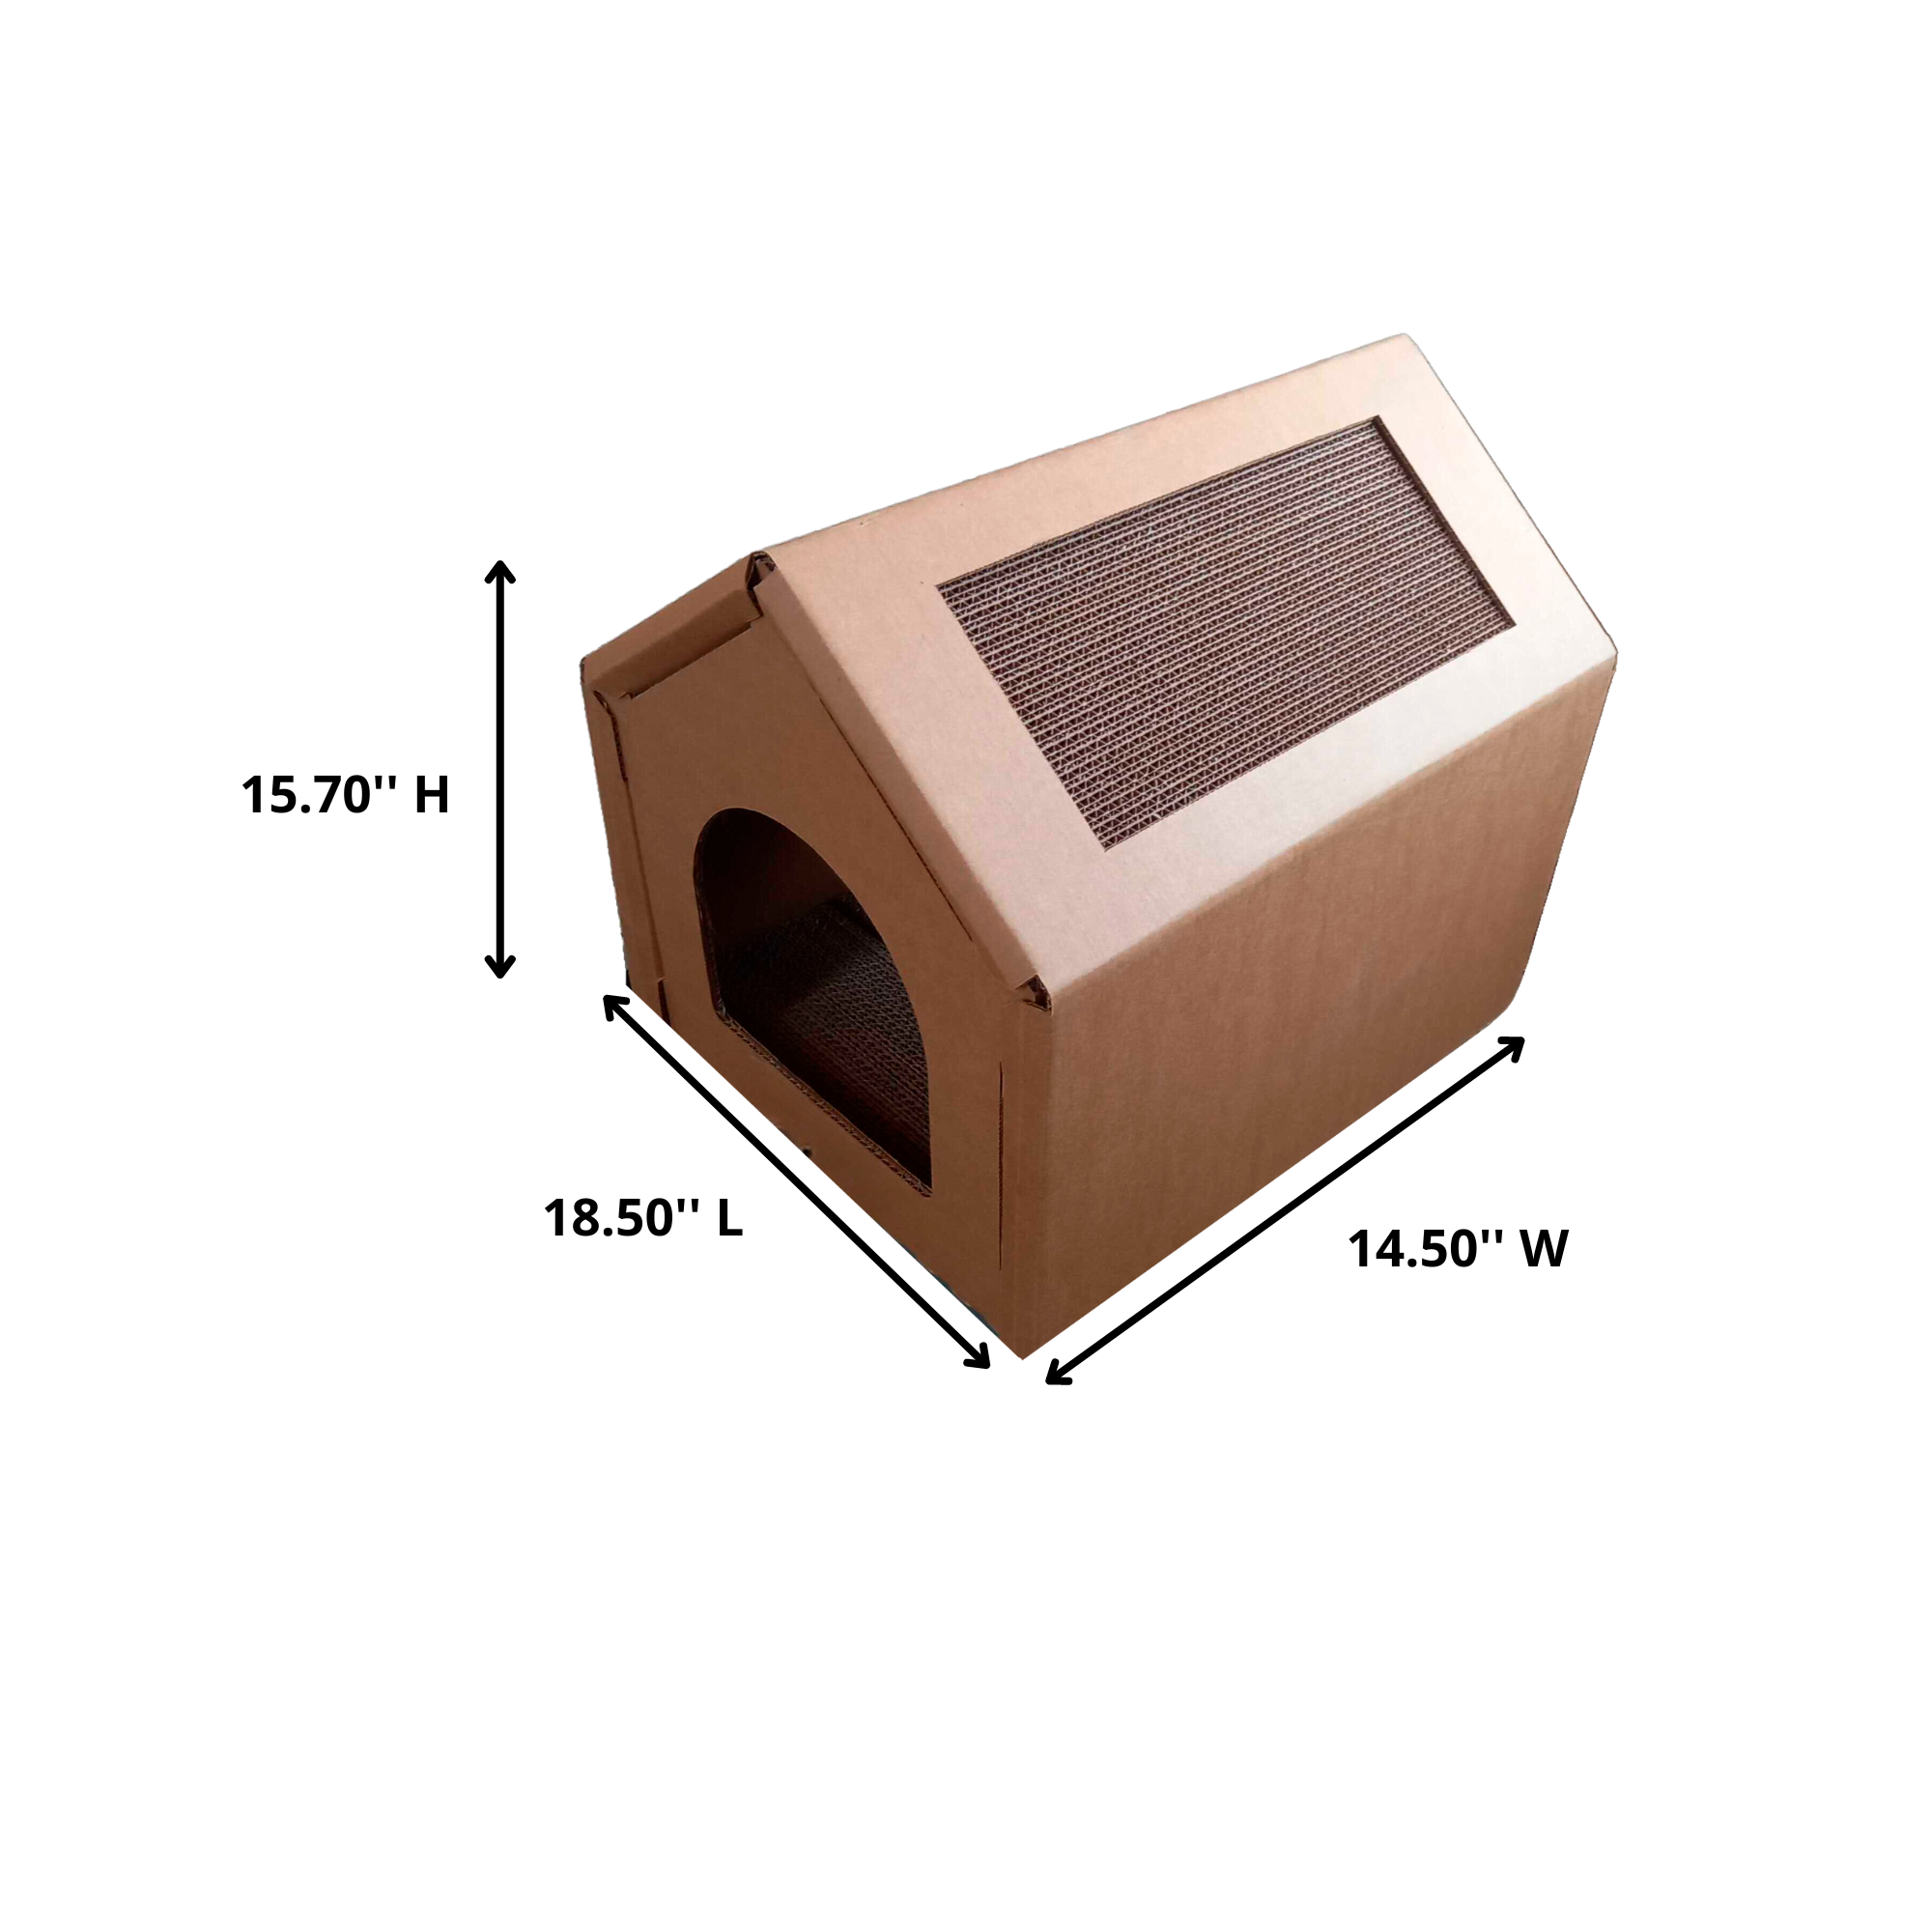 PetPro Deluxe Corrugated Cardboard Cat House - Sturdy and Eco-Friendly, Perfect Indoor Hideaway with Built-in Scratching Pads